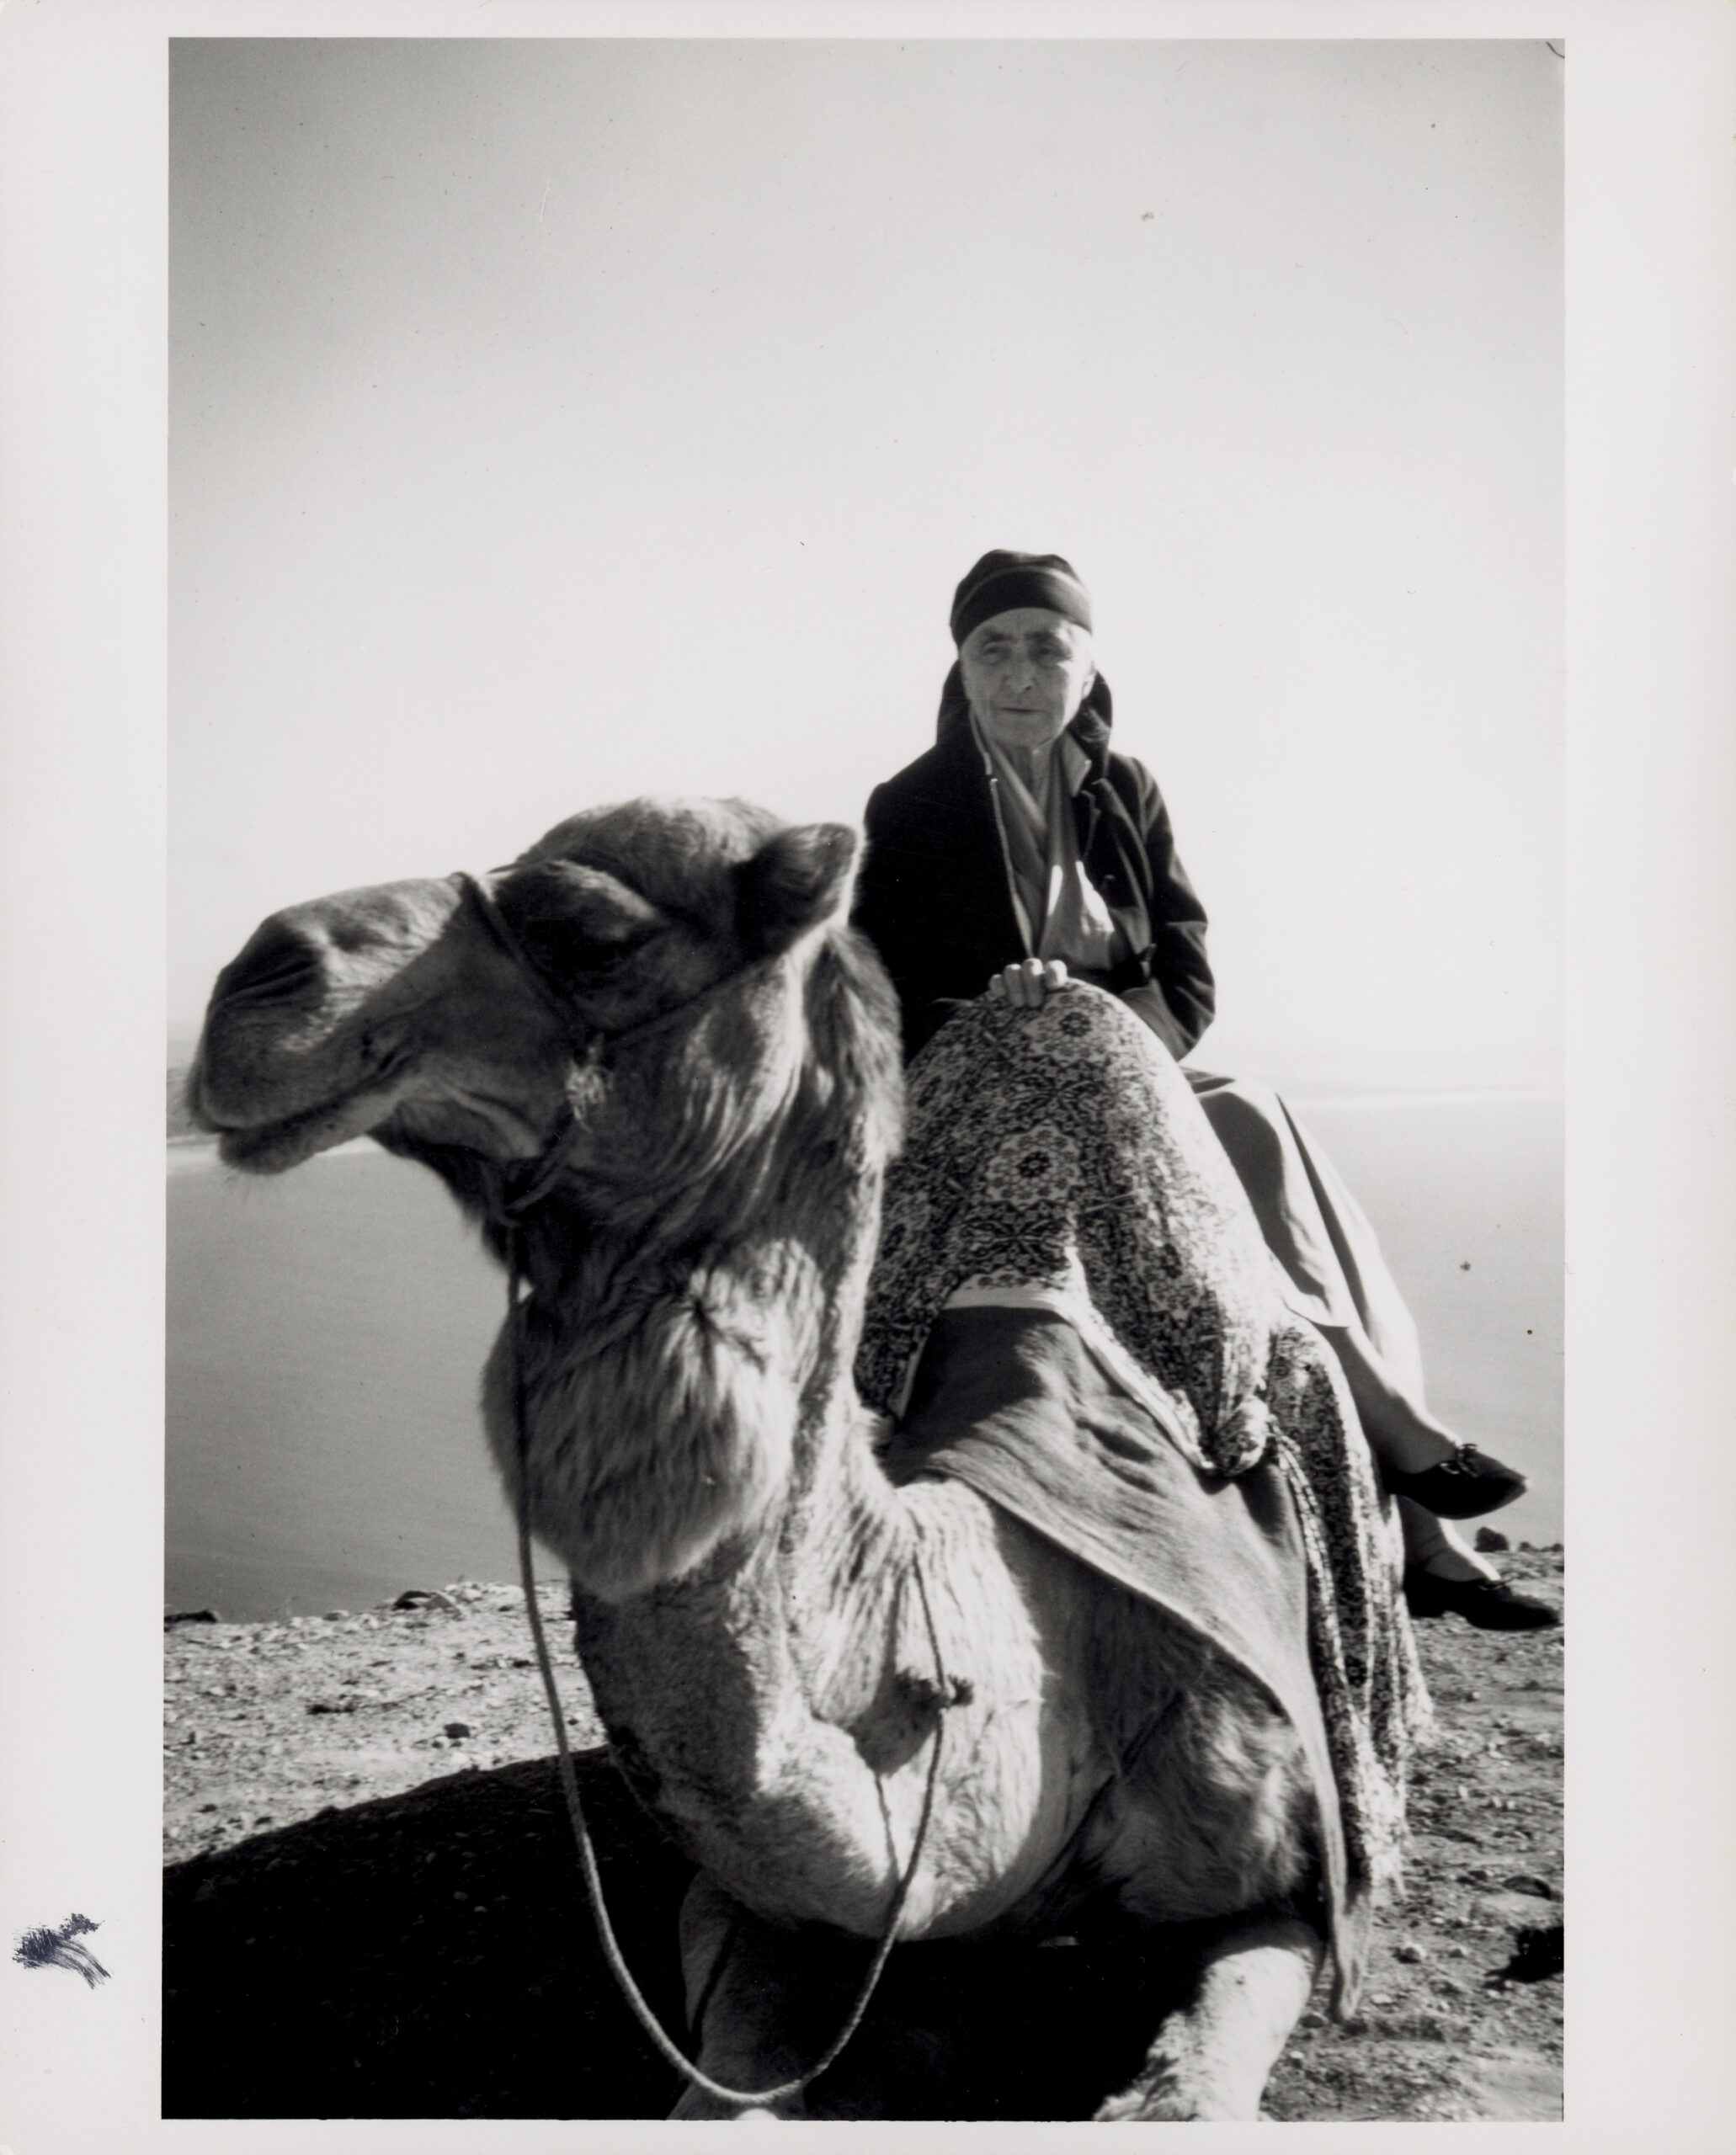 A black and white photograph of Georgia O'Keeffe seated on a camel. The camels face looks to the left in the foreground. Georgia O'Keeffe sits side saddle and is draped in fabrics with simple pumps on her feet.